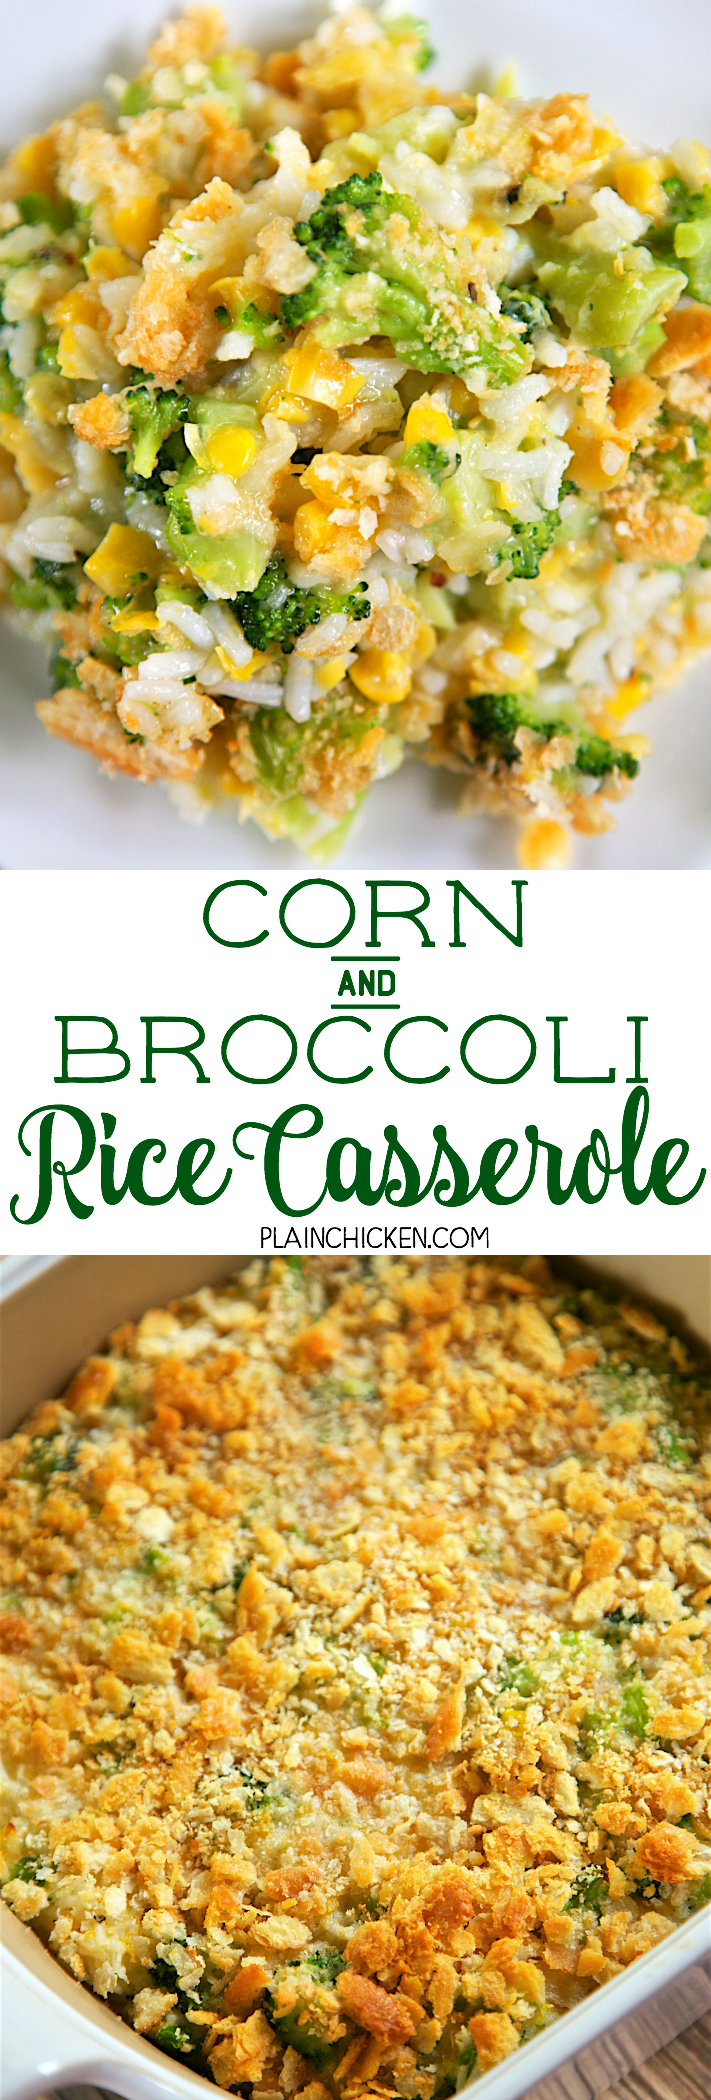 1-1/2 cups cooked rice 1 (10-oz) package frozen chopped broccoli, thawed and drained 1 (14.75-oz) can creamed corn 1 egg, beaten